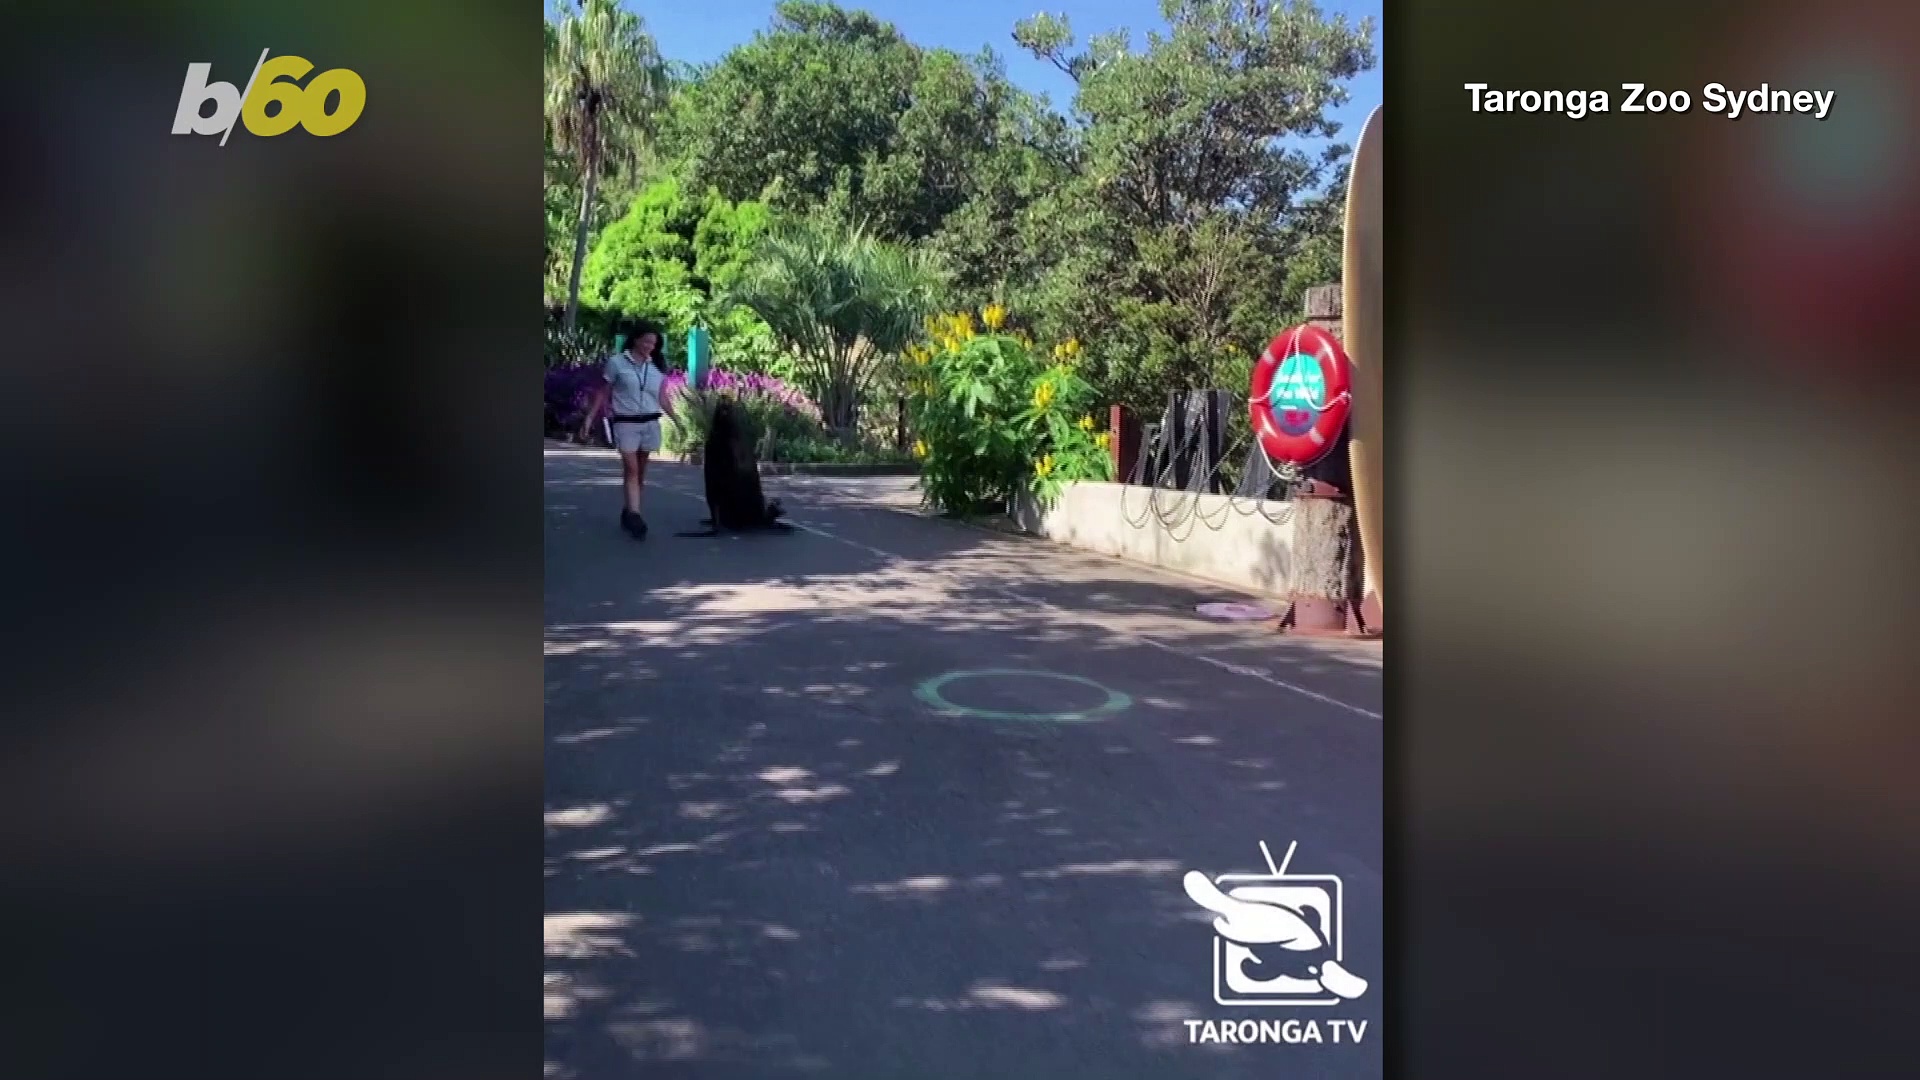 Walk on the Wild Side! Sea Lion & Zookeeper Walk Together Amid Empty Zoo Due to COVID-19!